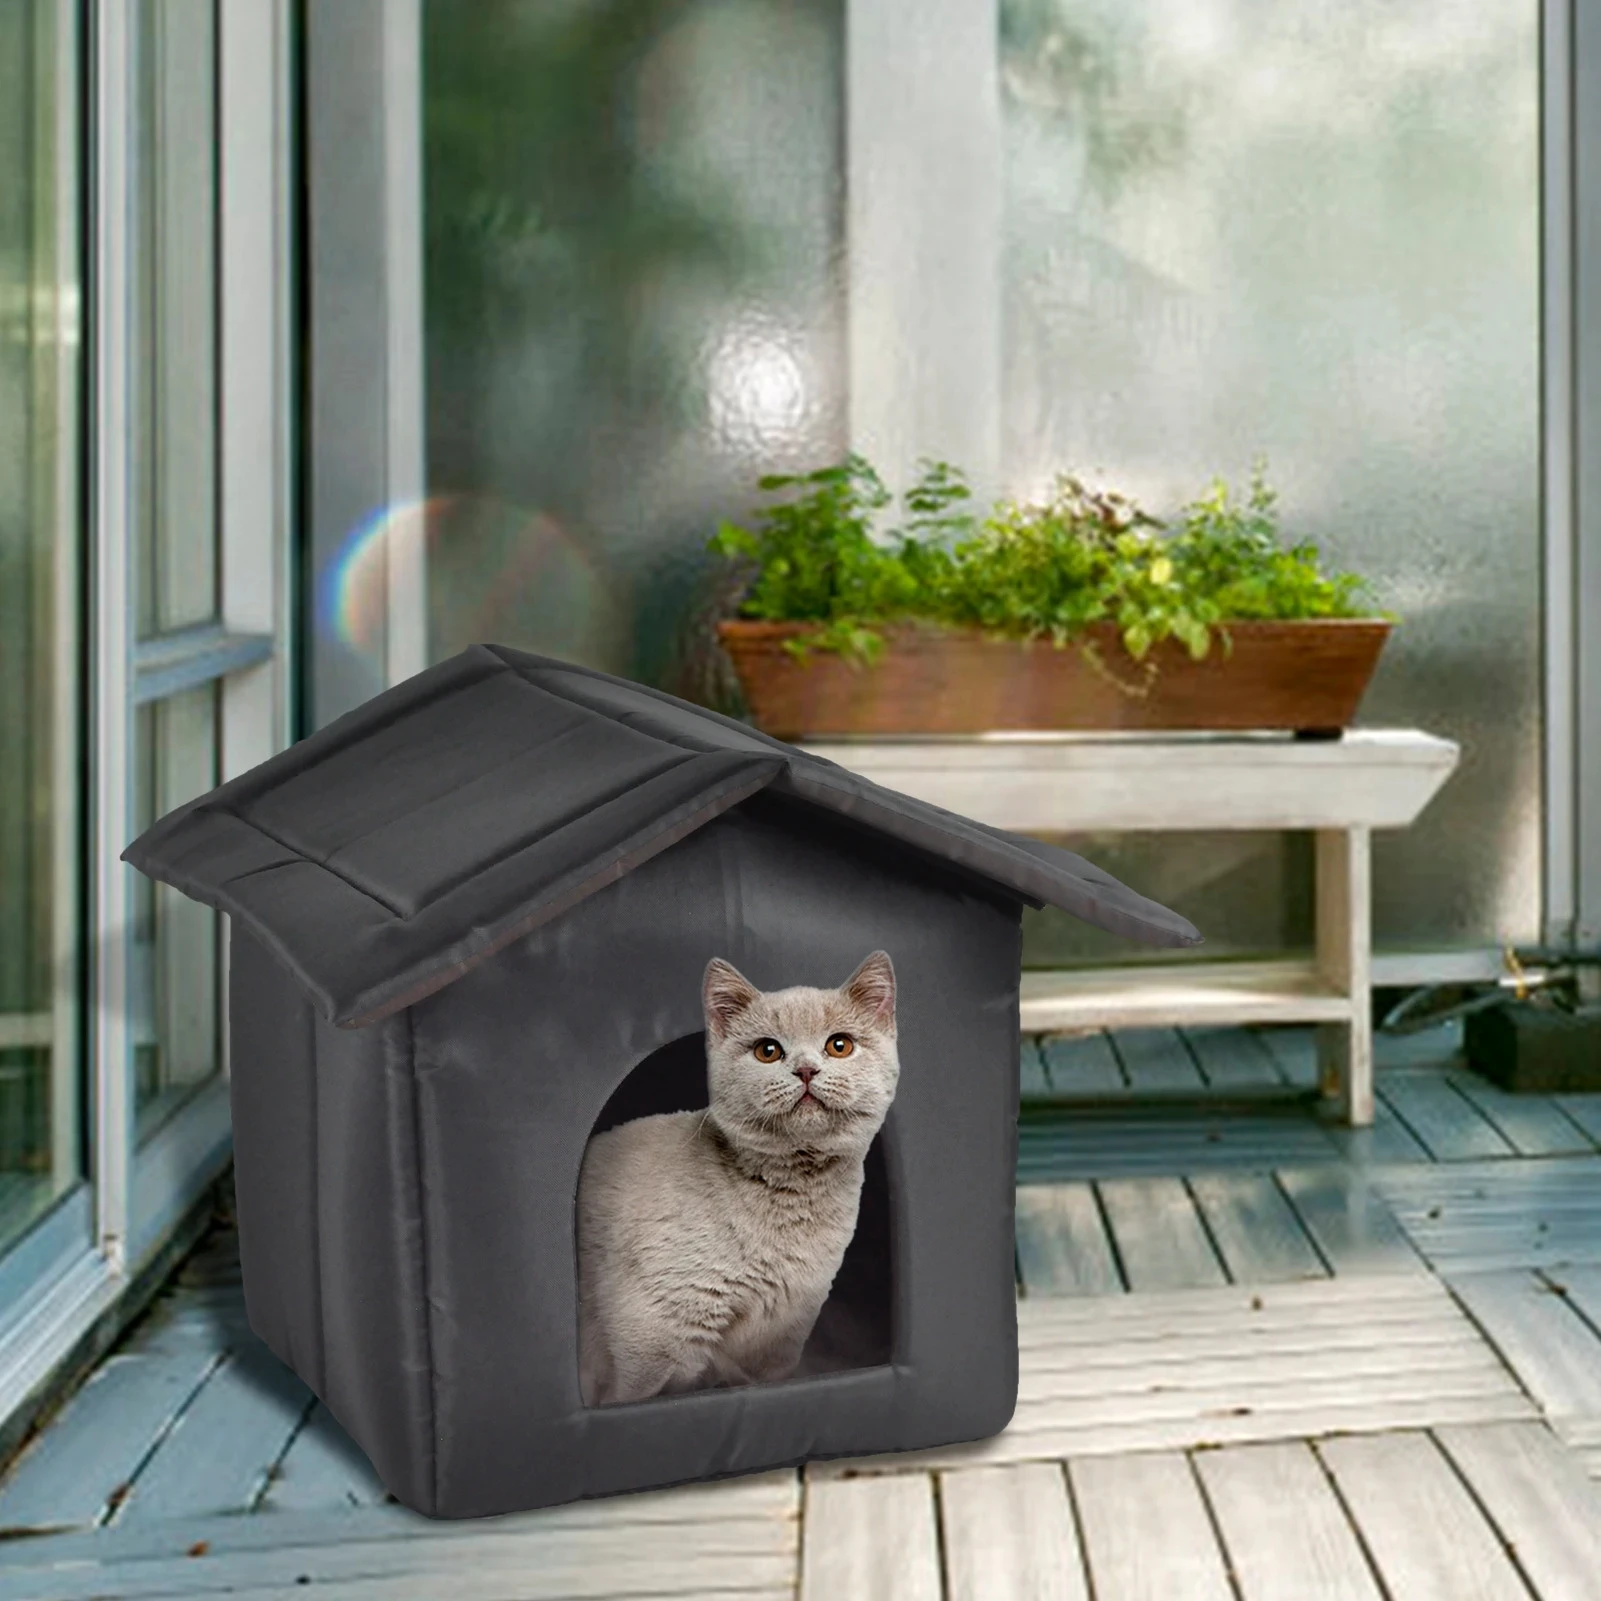 

Cats House Waterproof Outdoor Keep Warm Pet Cat Cave Beds Nest Funny Foldable And Washable For Kitten Puppy Pets Supplies